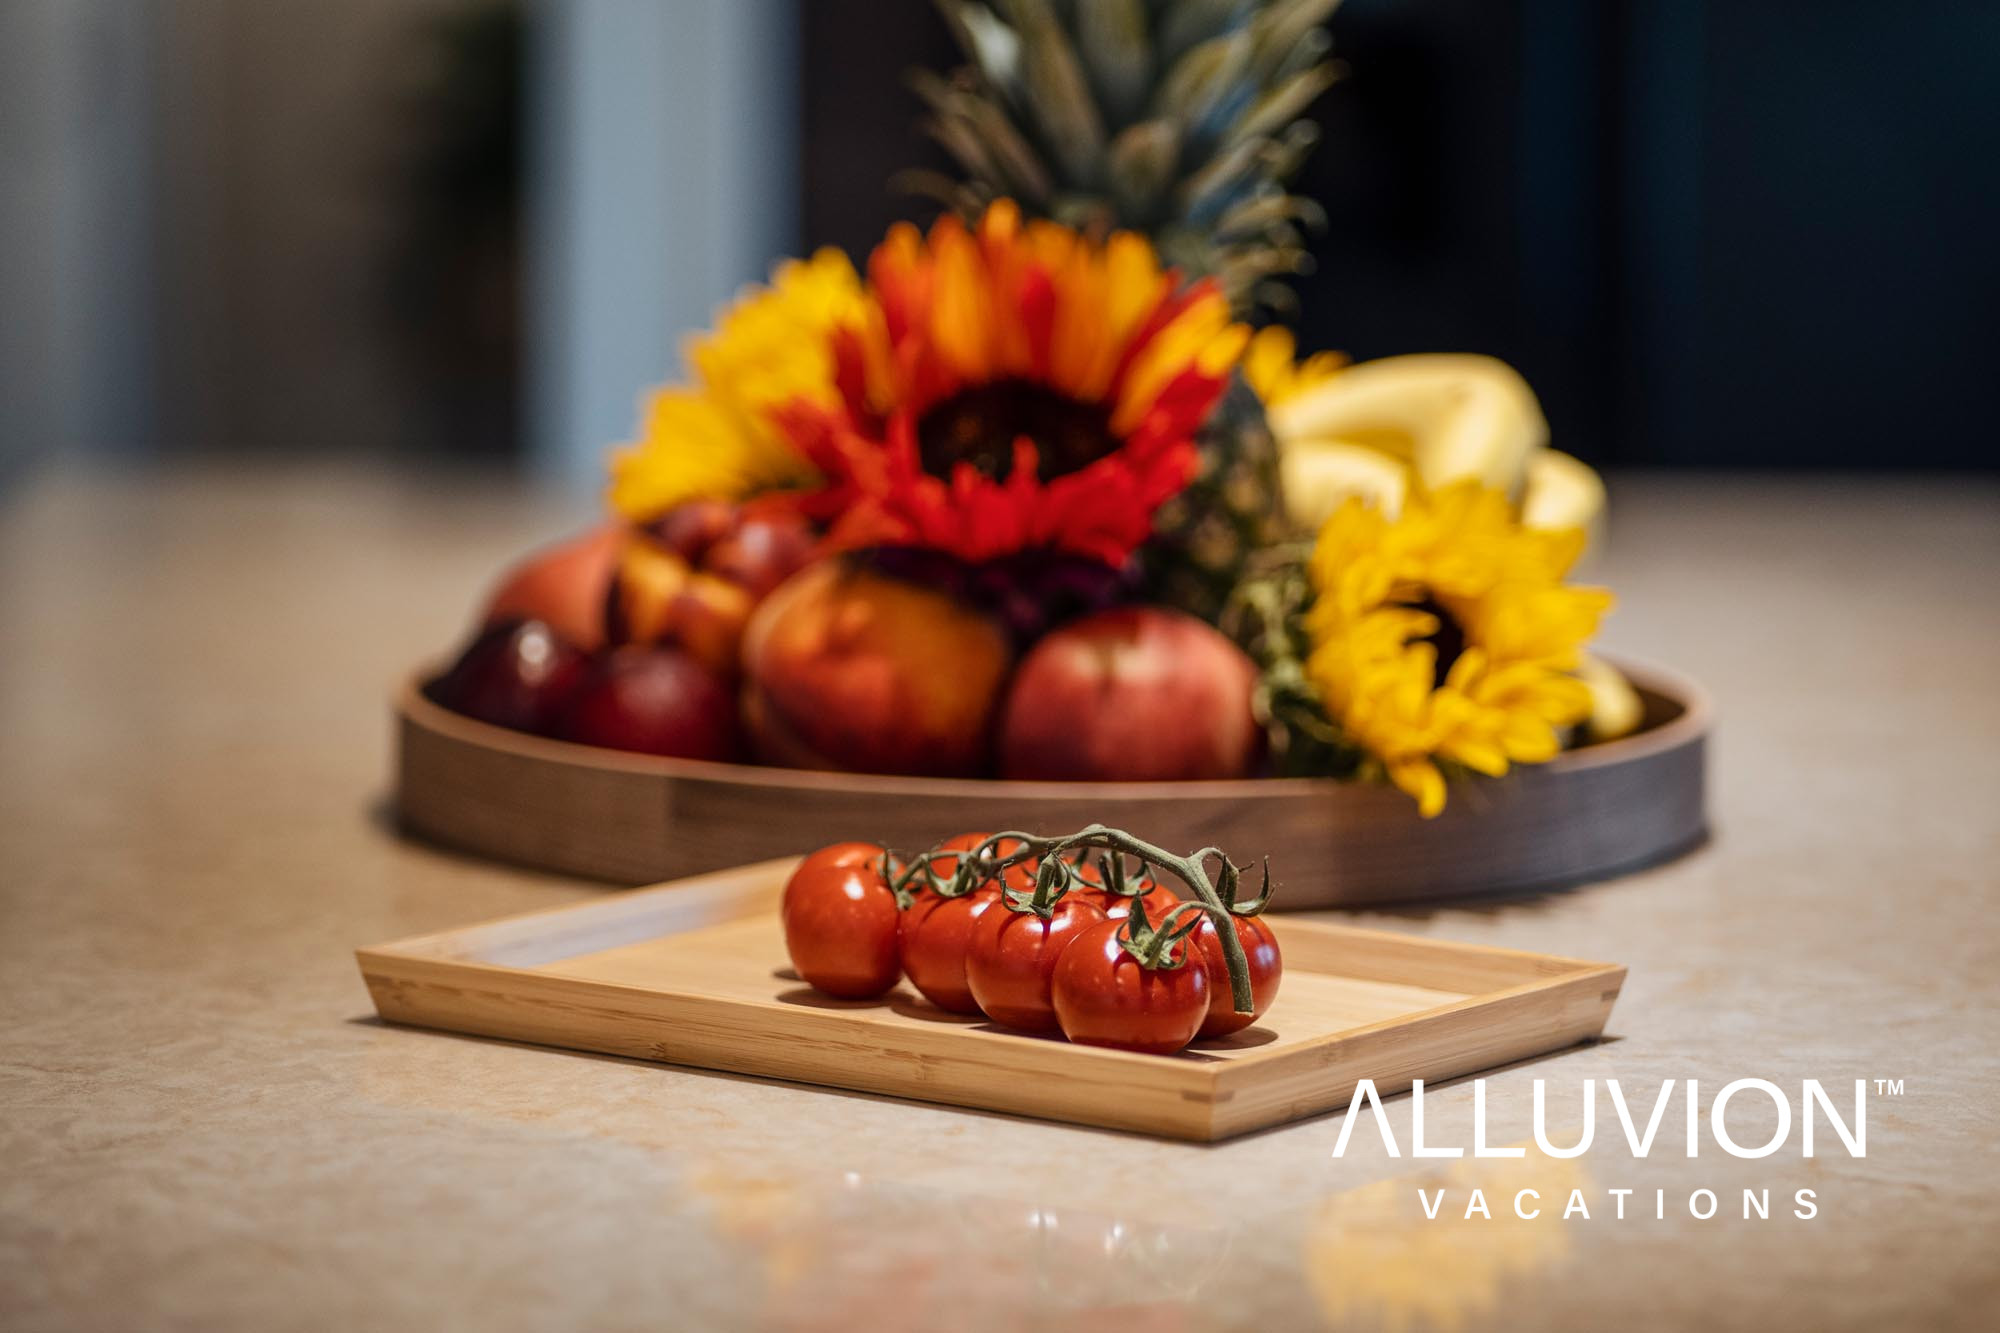 Luxury Airbnb Experience Upgrades at the Alluvion Vacation Properties – Fruit Basket – Fresh Local Veggie Basket – Skincare Basket – Spa Basket